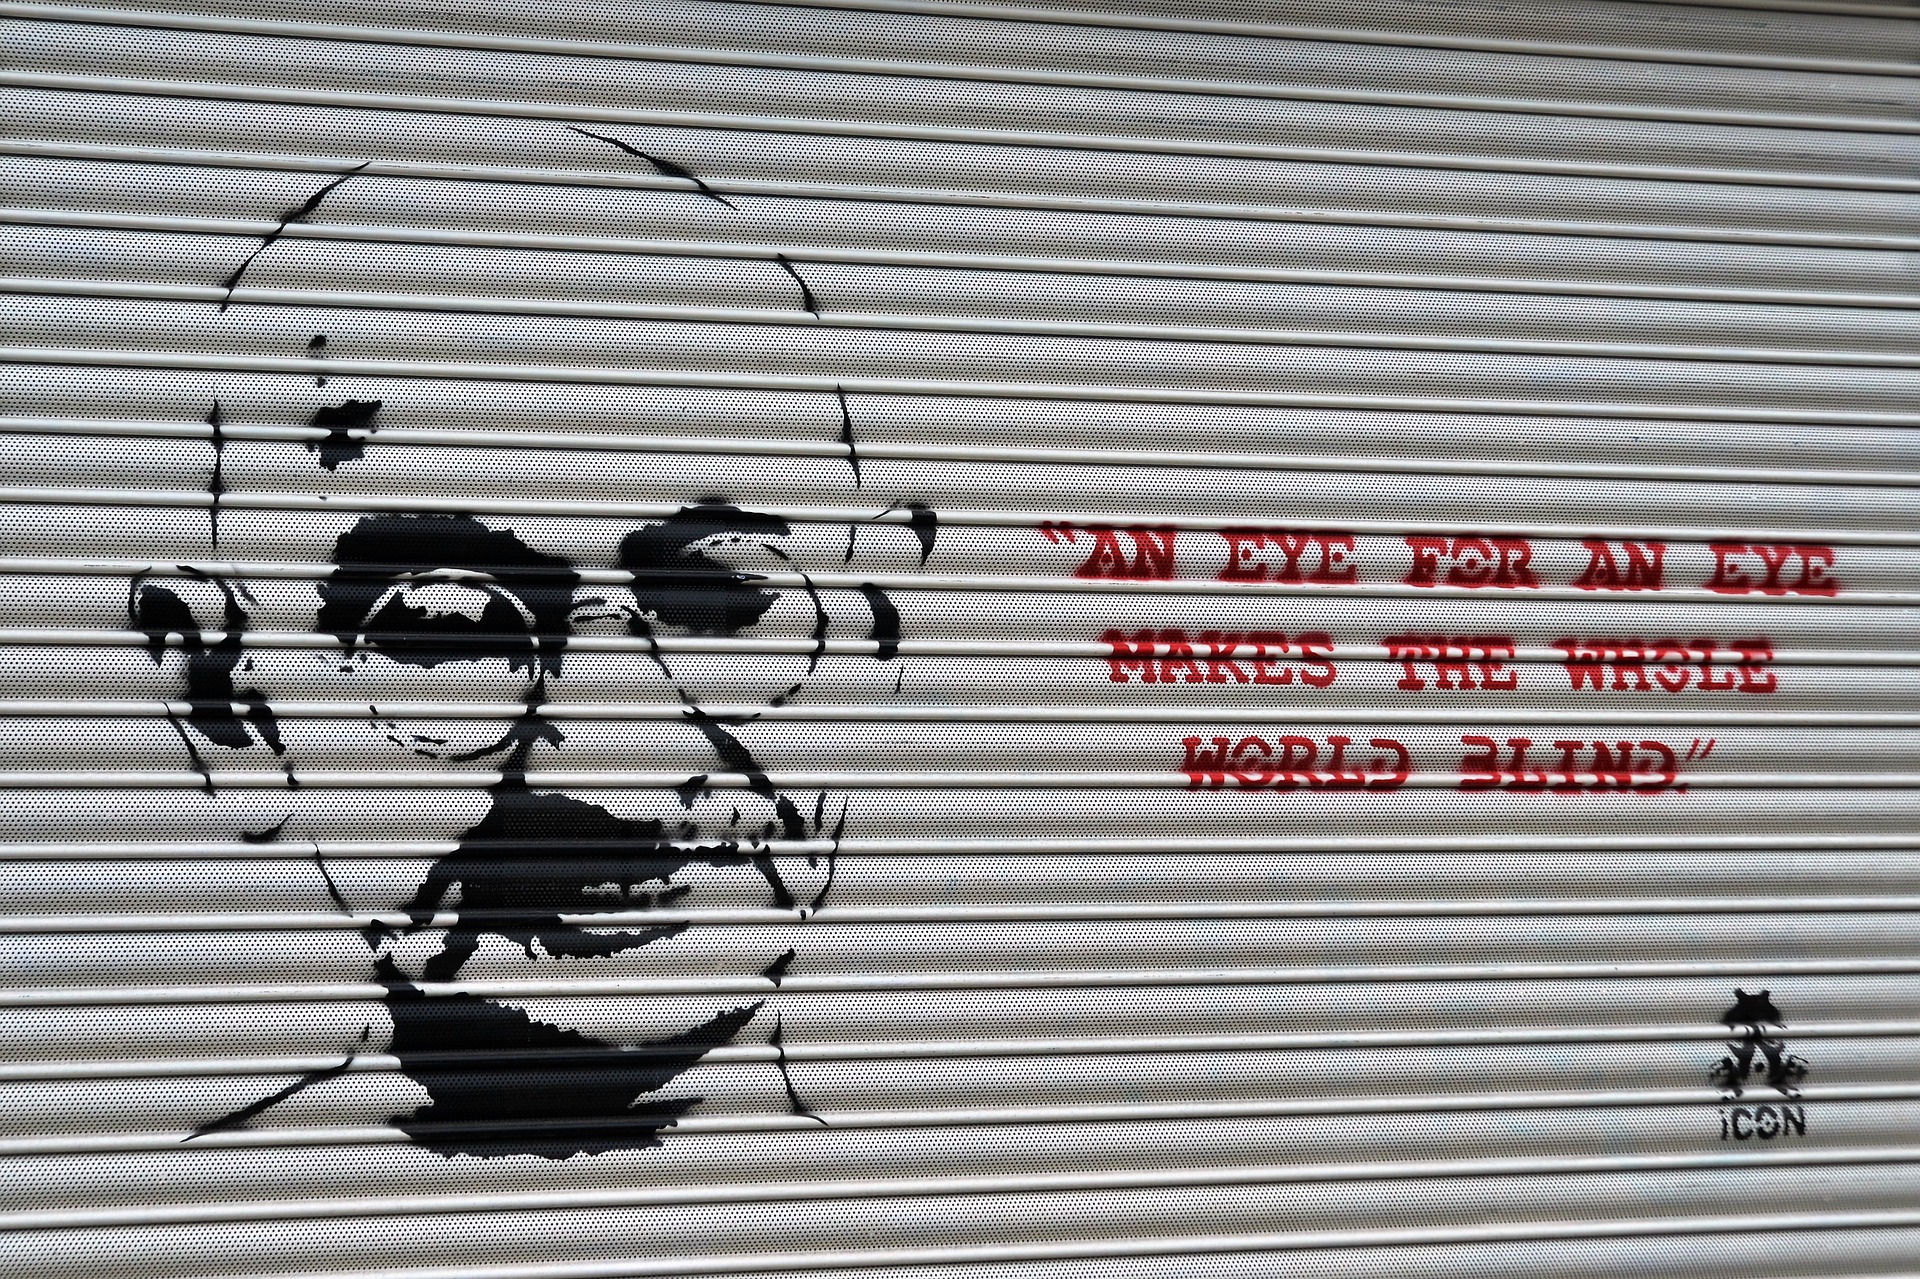 street art - gandhi quote - an eye for an eye makes the whole world blind